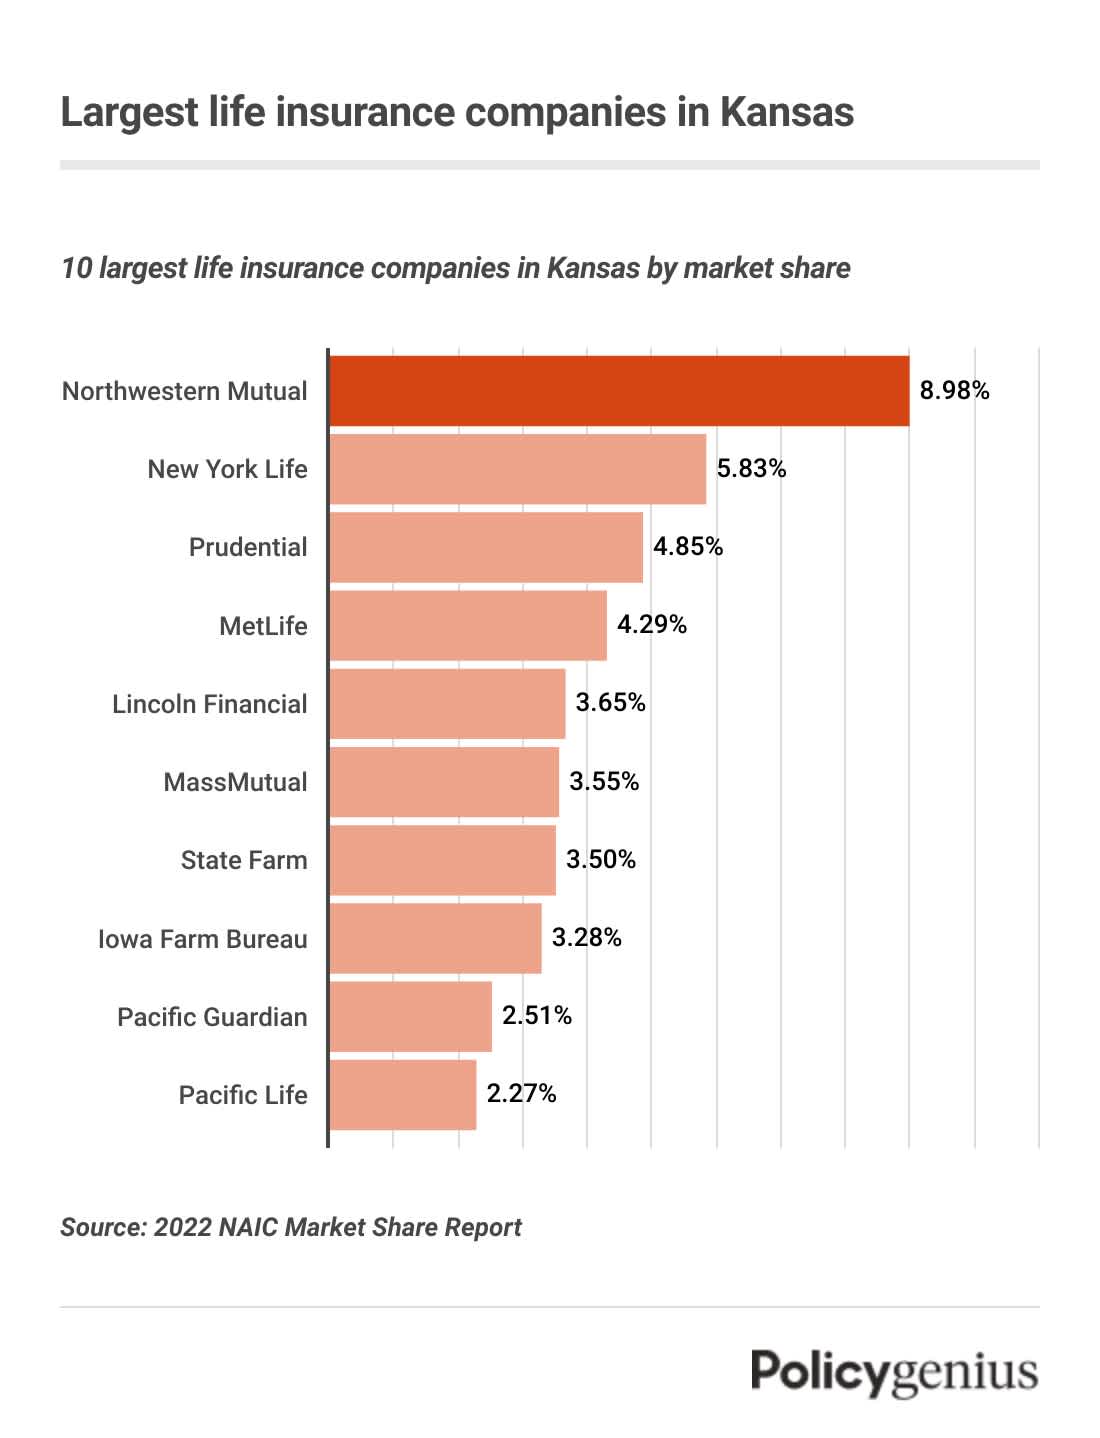 A bar graph showing the largest life insurance companies in Kansas. Northwestern Mutual is the largest company by market share.